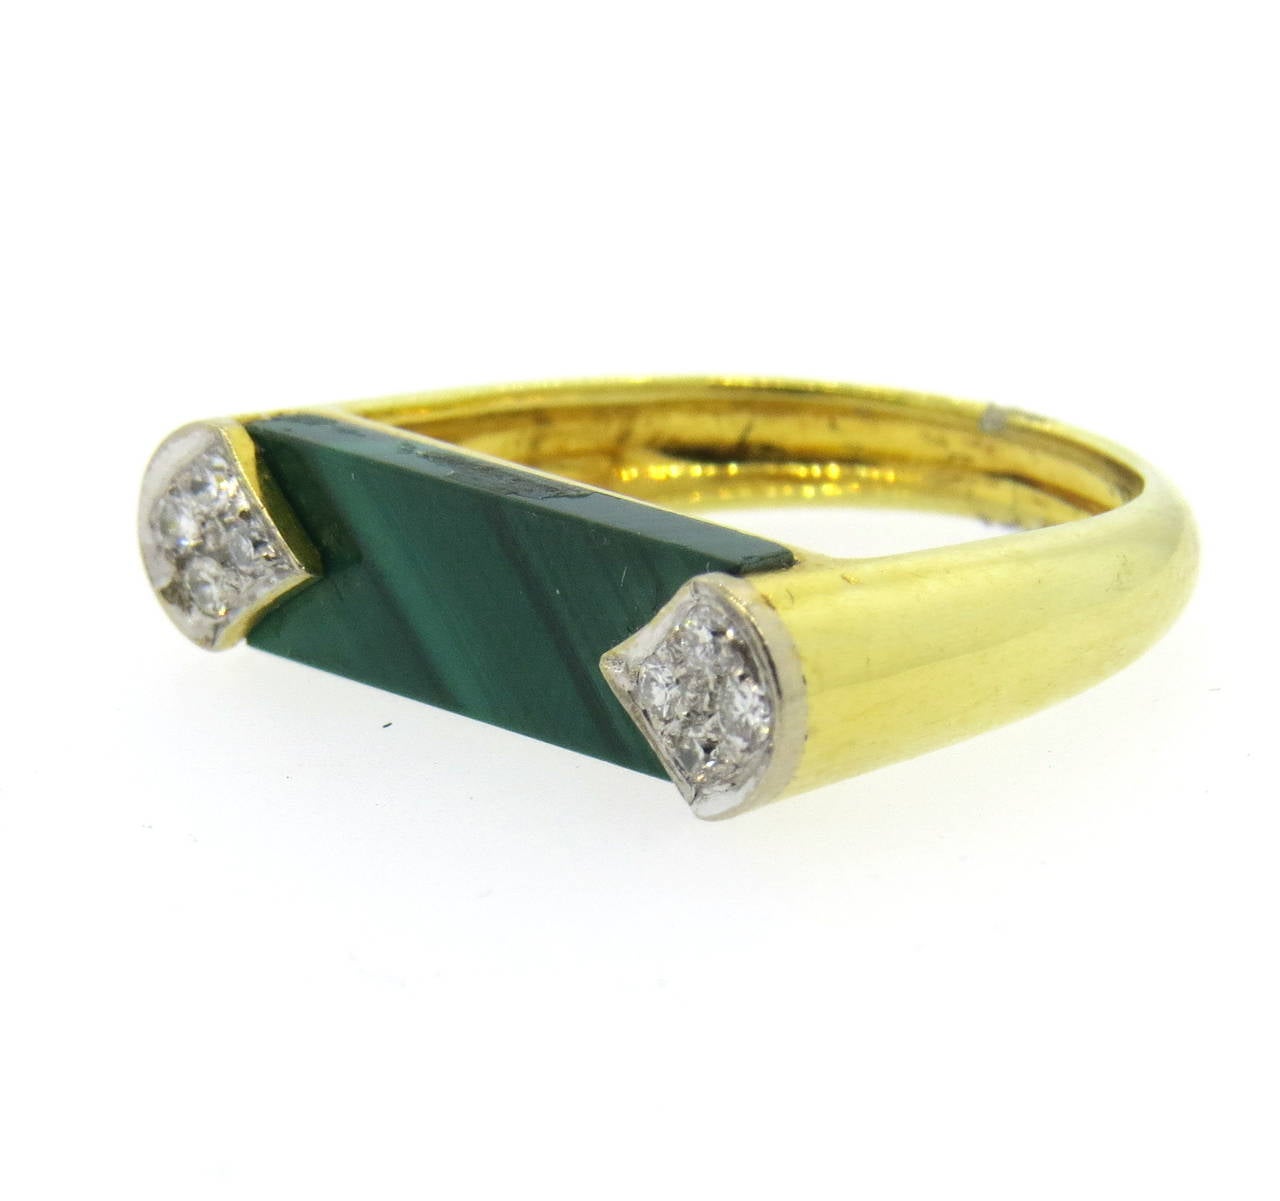 Circa 1970s 18k gold ring, featuring malachite, decorated with approx. 0.14ctw. Ring is a size 6, ring top is 22mm x 6mm. Weight - 5.8 grams